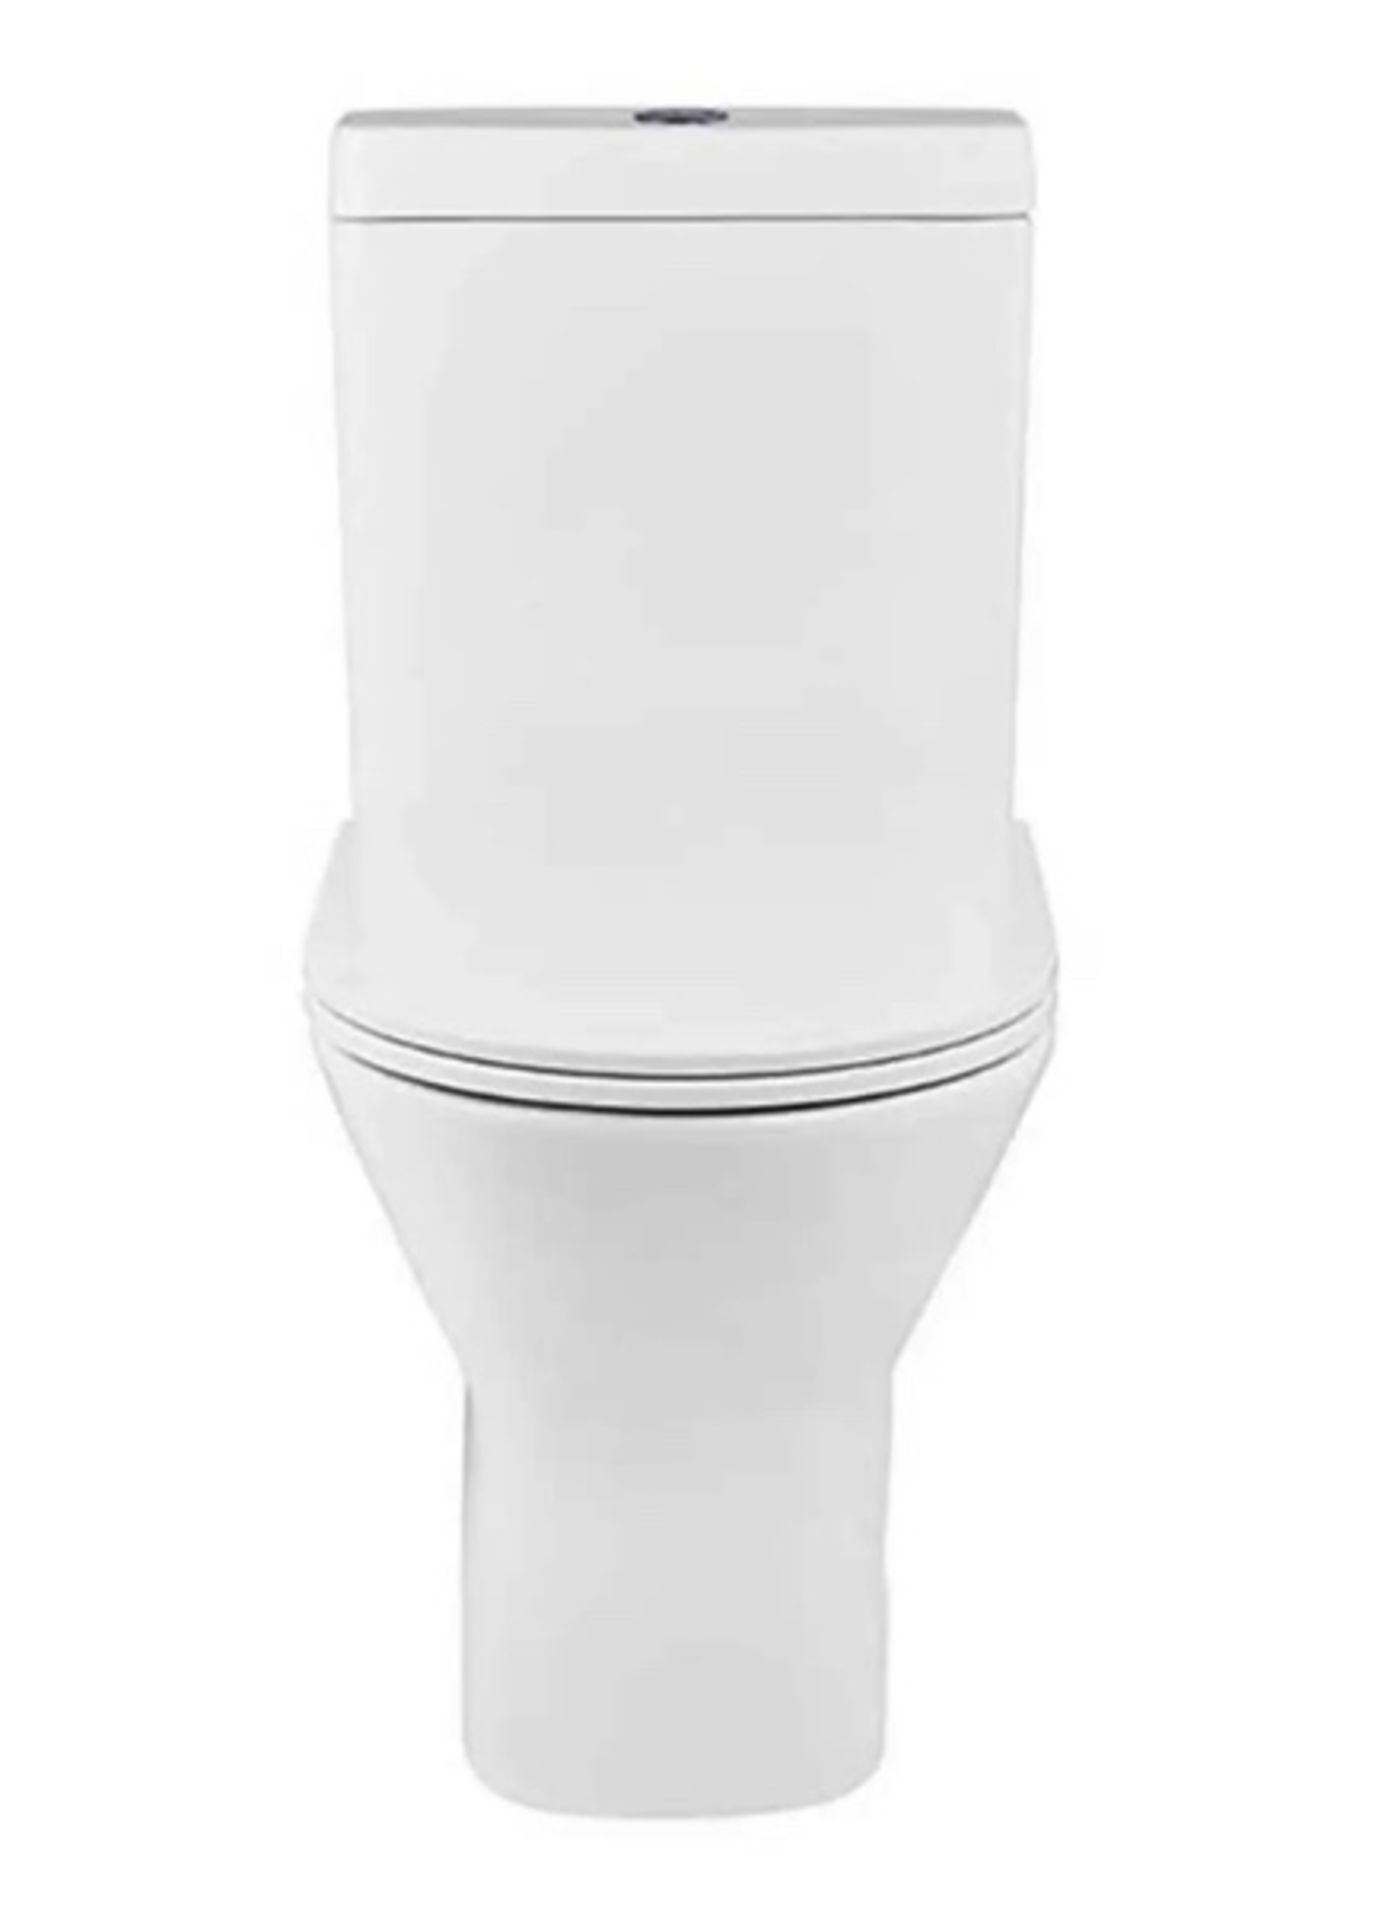 Brand New Boxed Falcon Rimless Back To Wall Close Coupled Toilet Soft Close Toilet Seat RRP £324